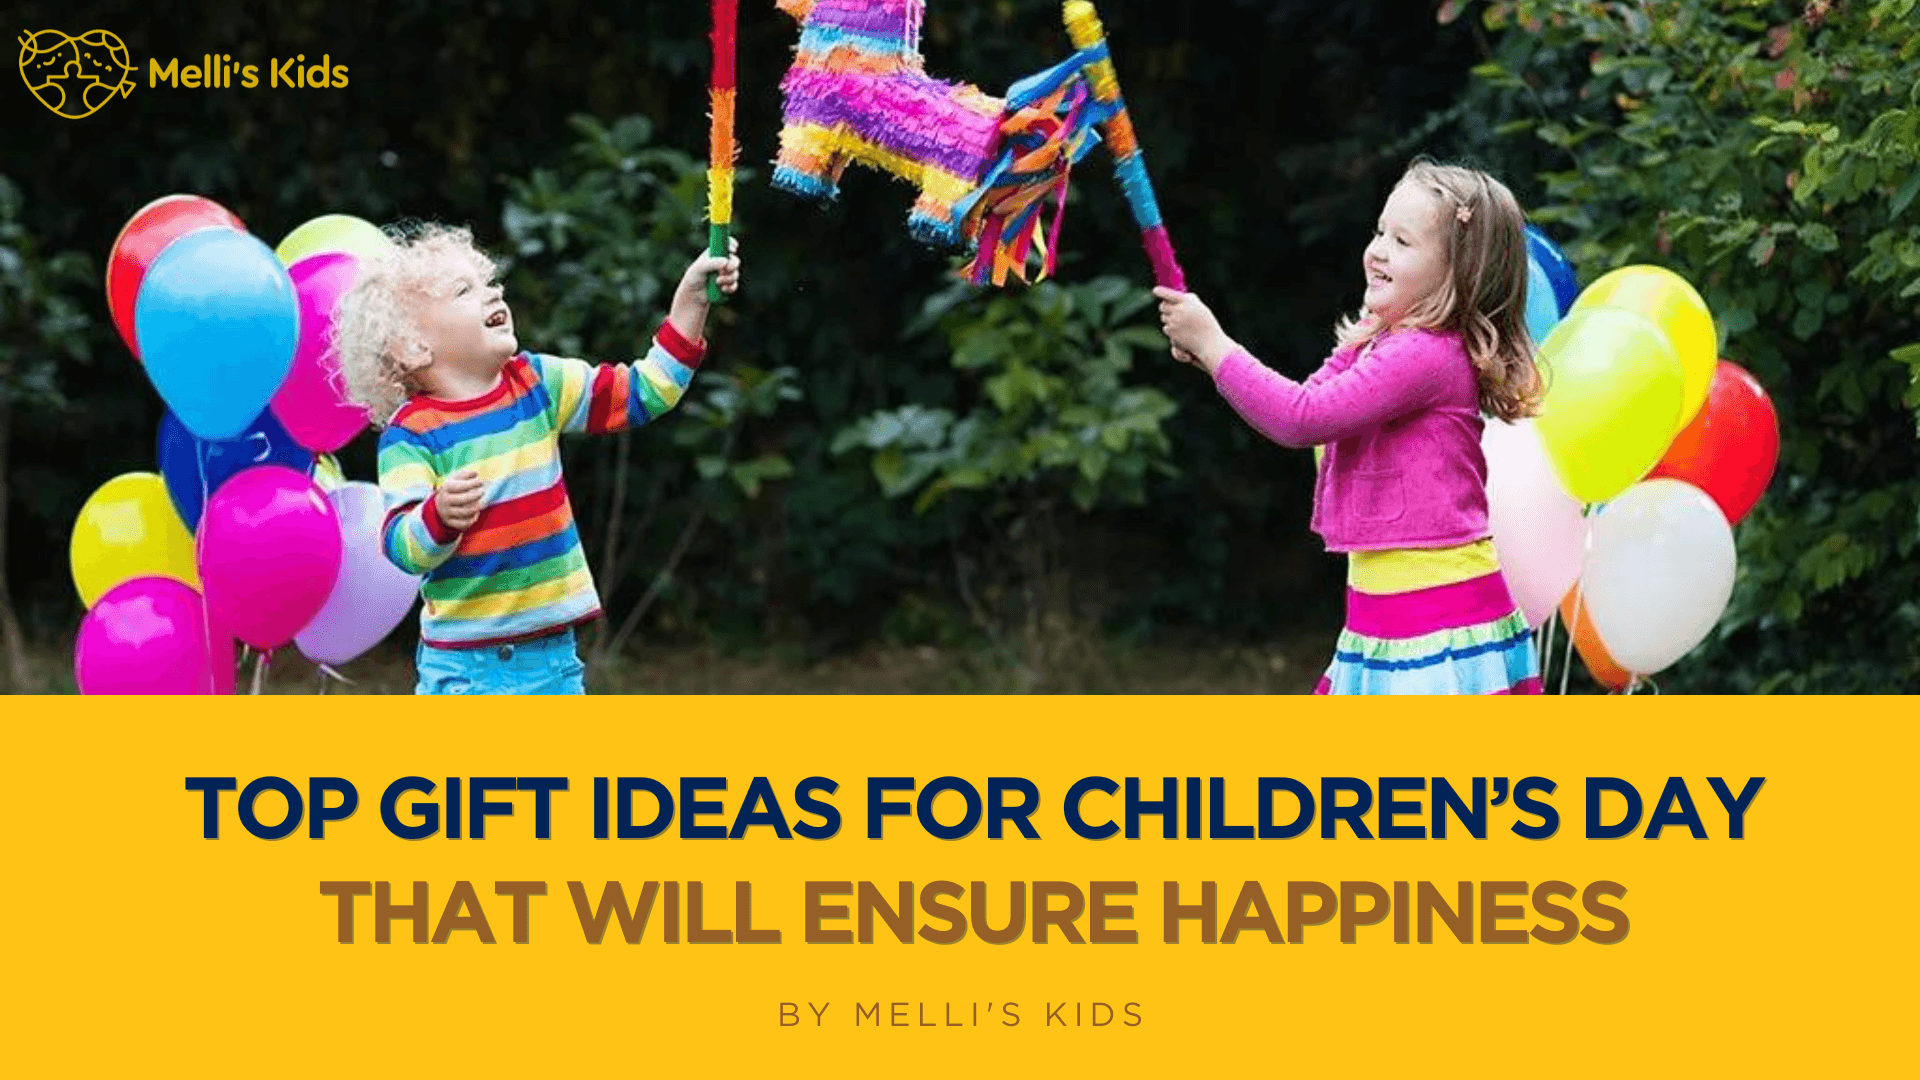 Top gift ideas for children's day that ensure happiness - Melli's Kids